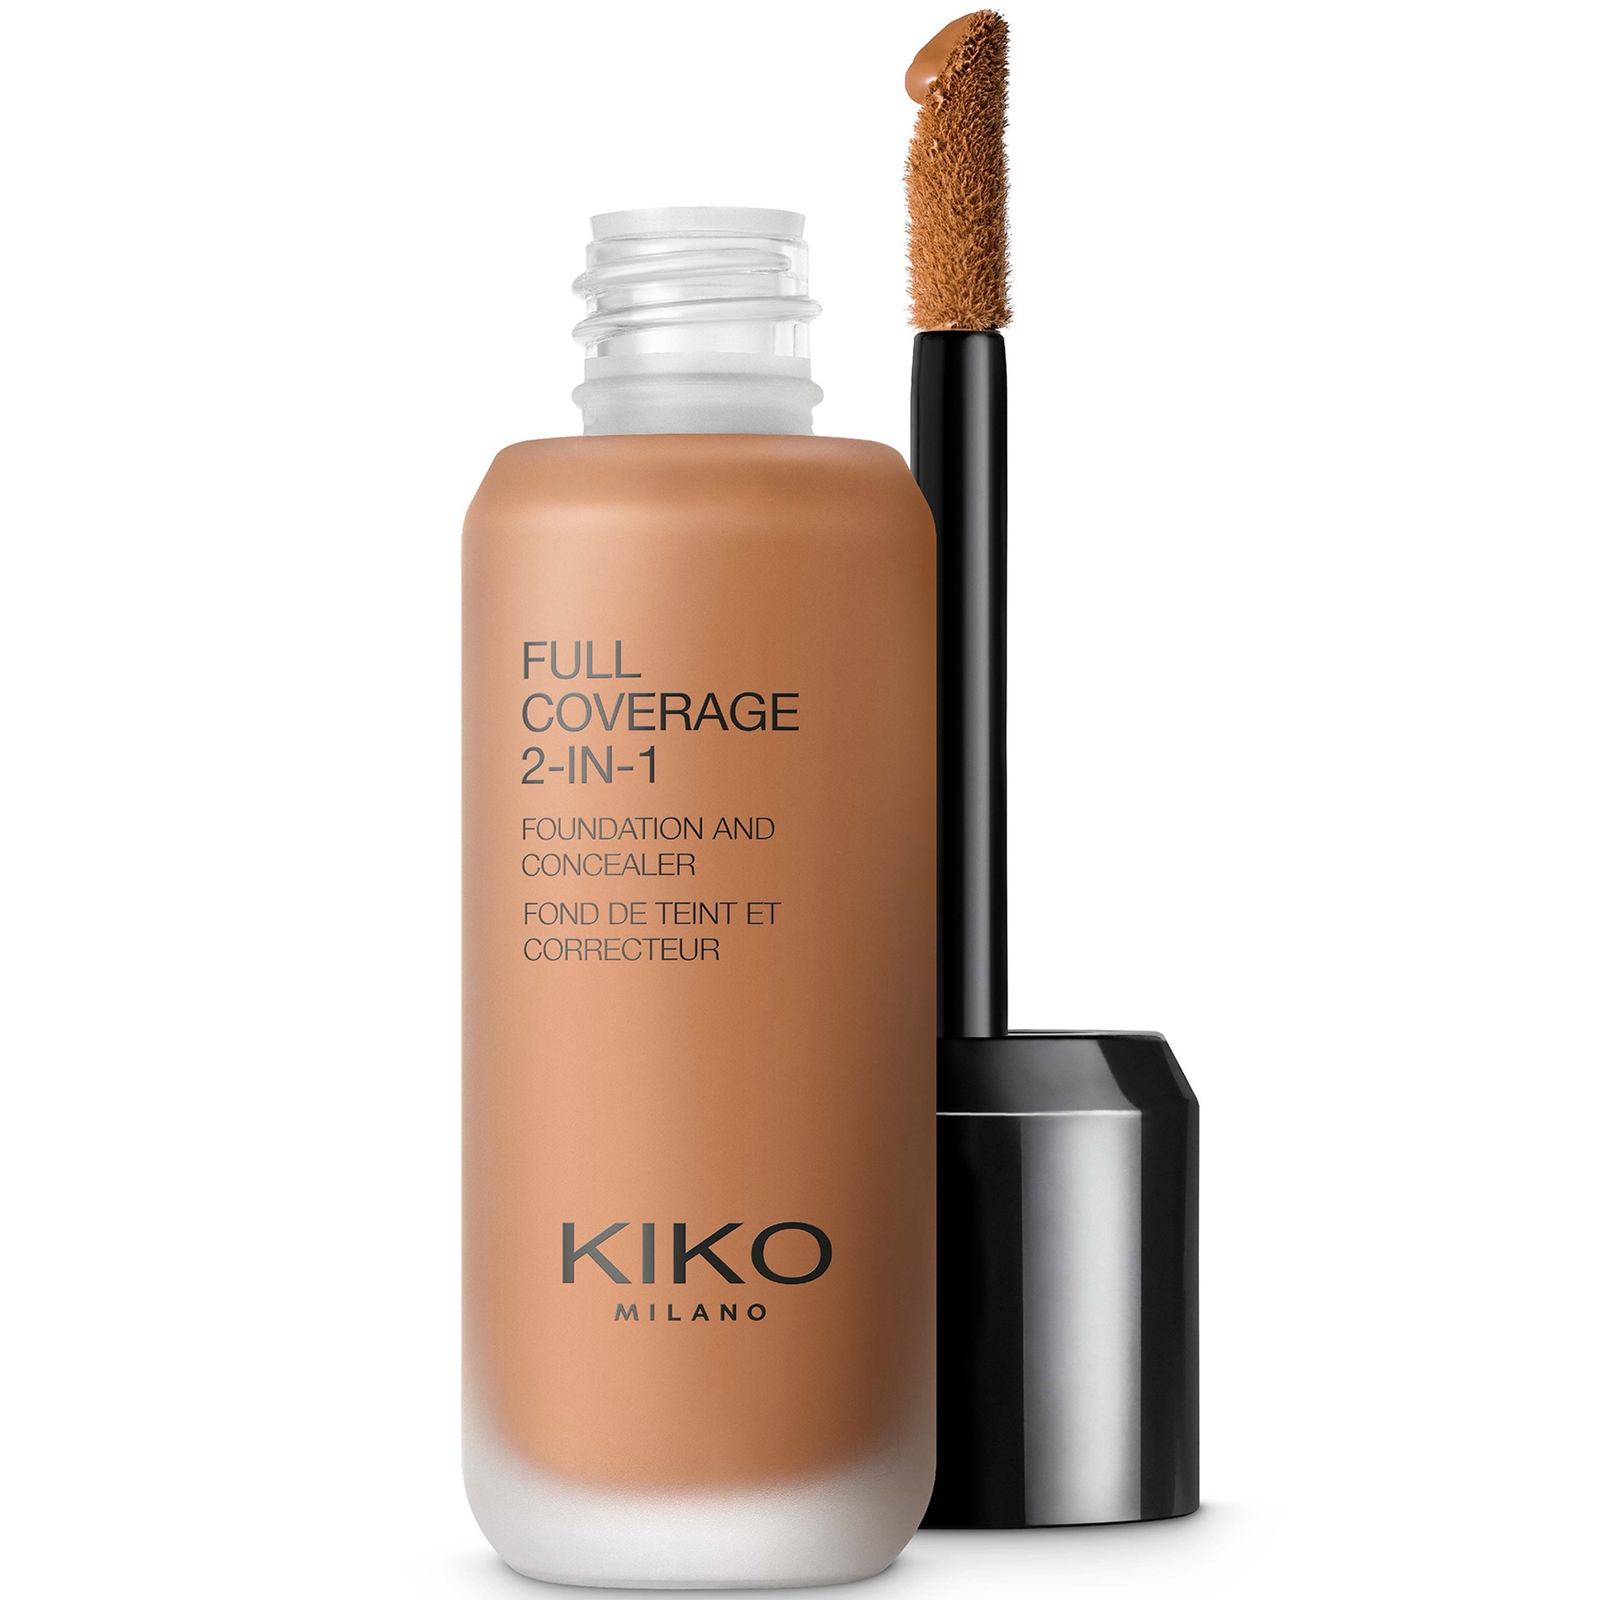 Image of KIKO Milano Full Coverage 2-in-1 Foundation and Concealer 25ml (Various Shades) - 145 Neutral